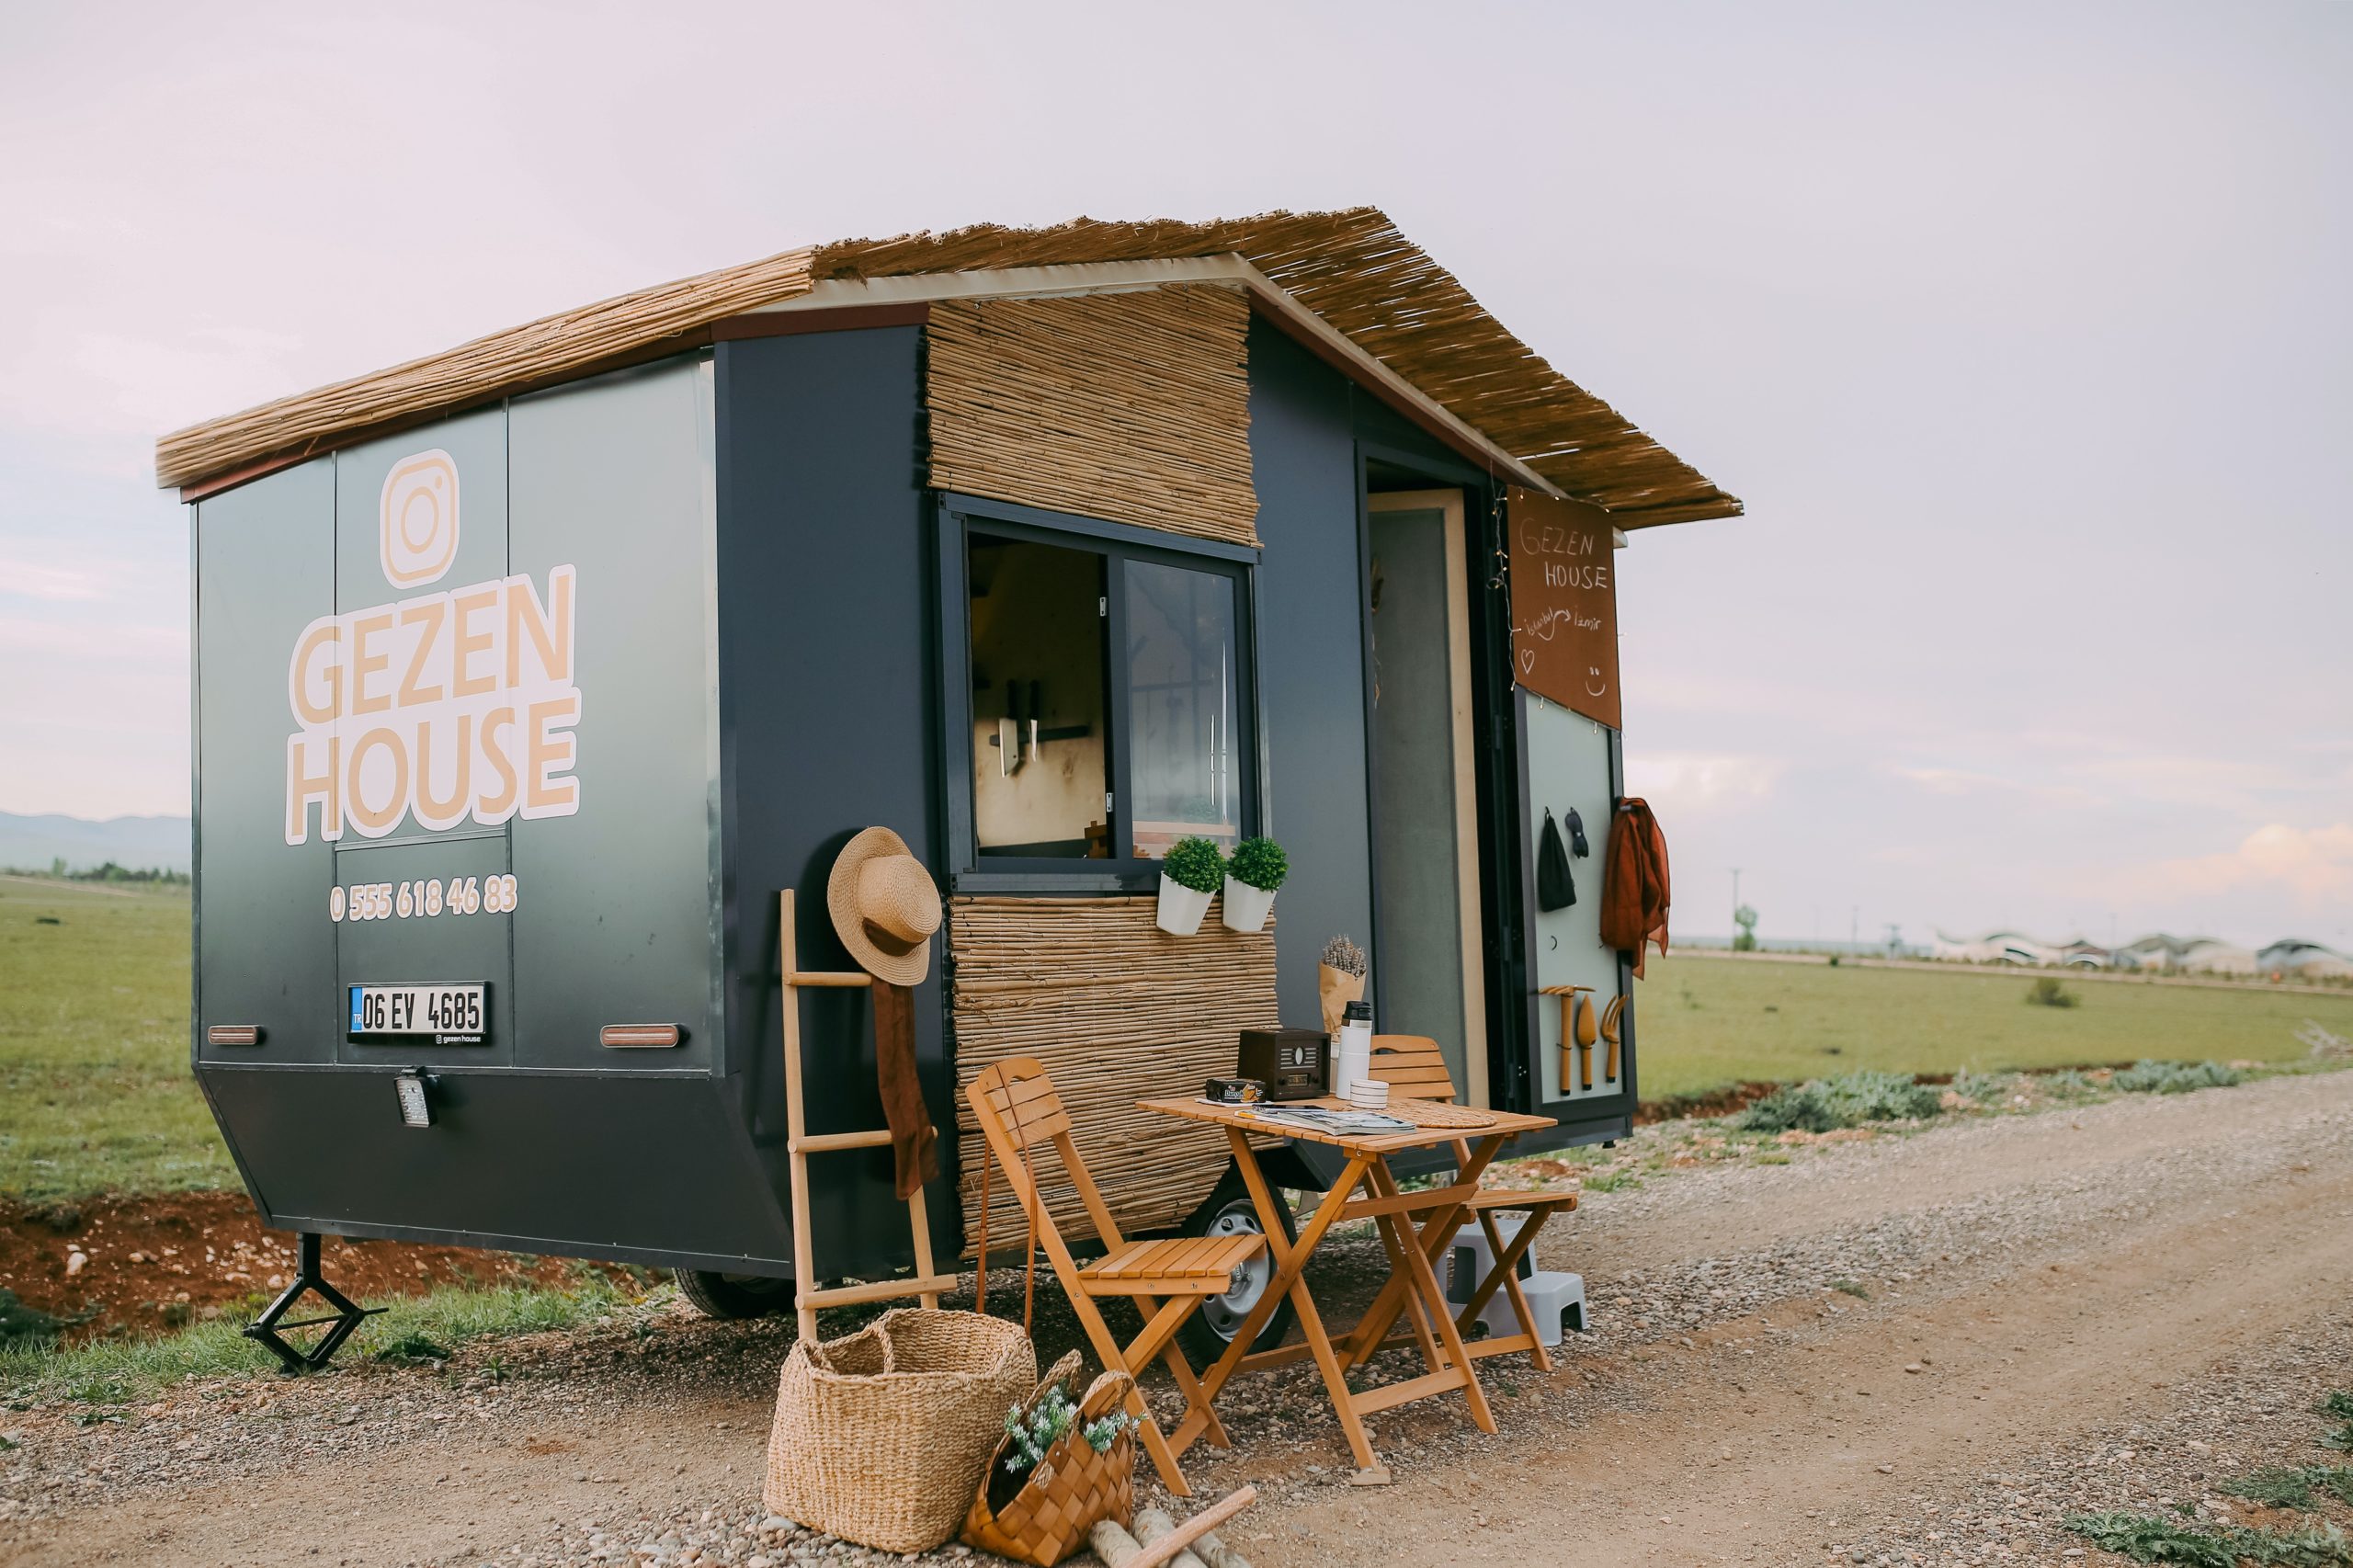 Tiny House Interior Design Tips and Tricks for A Better Life Style ...